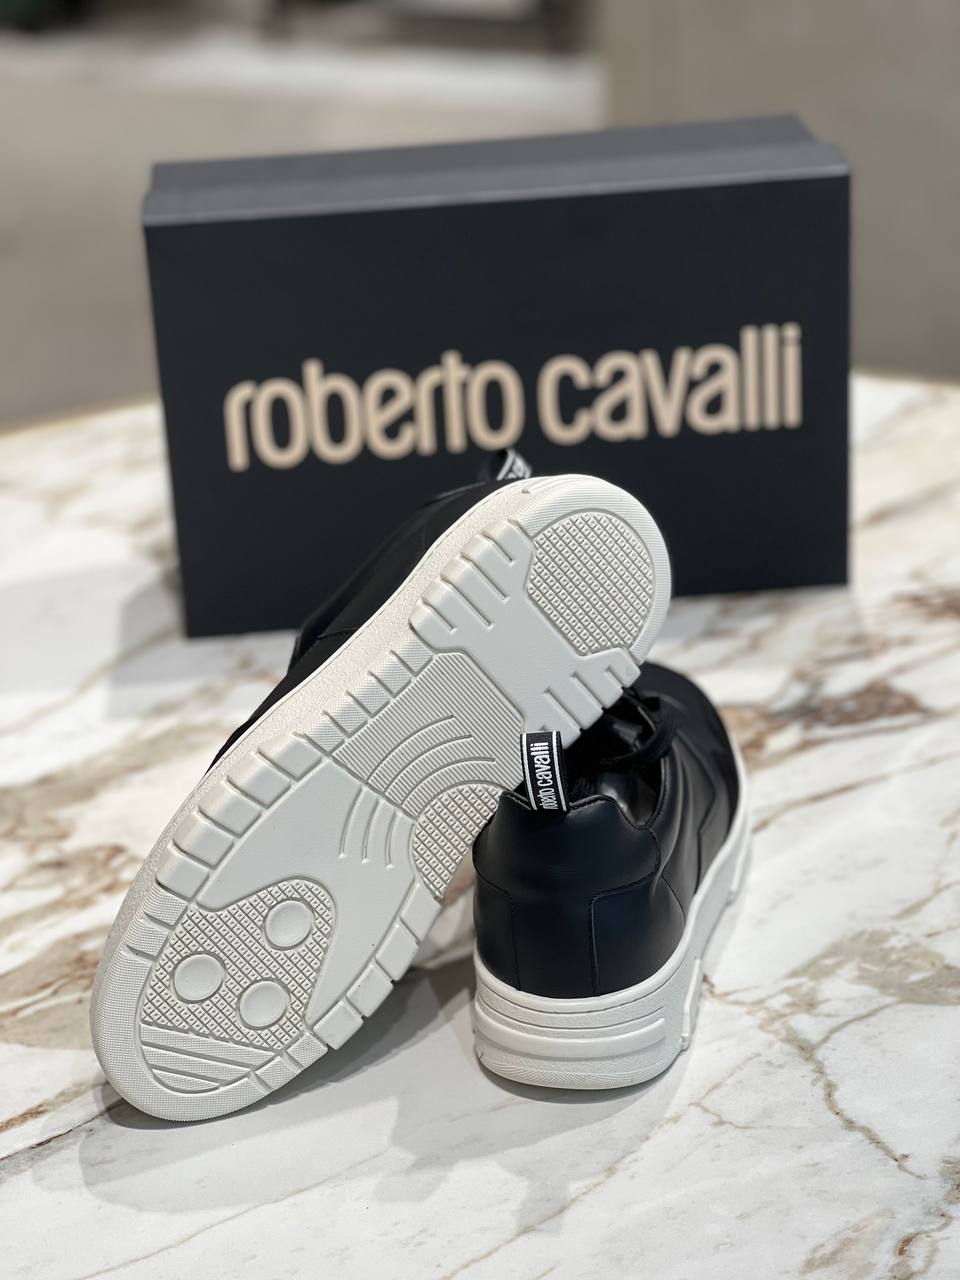 Roberto Cavalli Outlets 6122